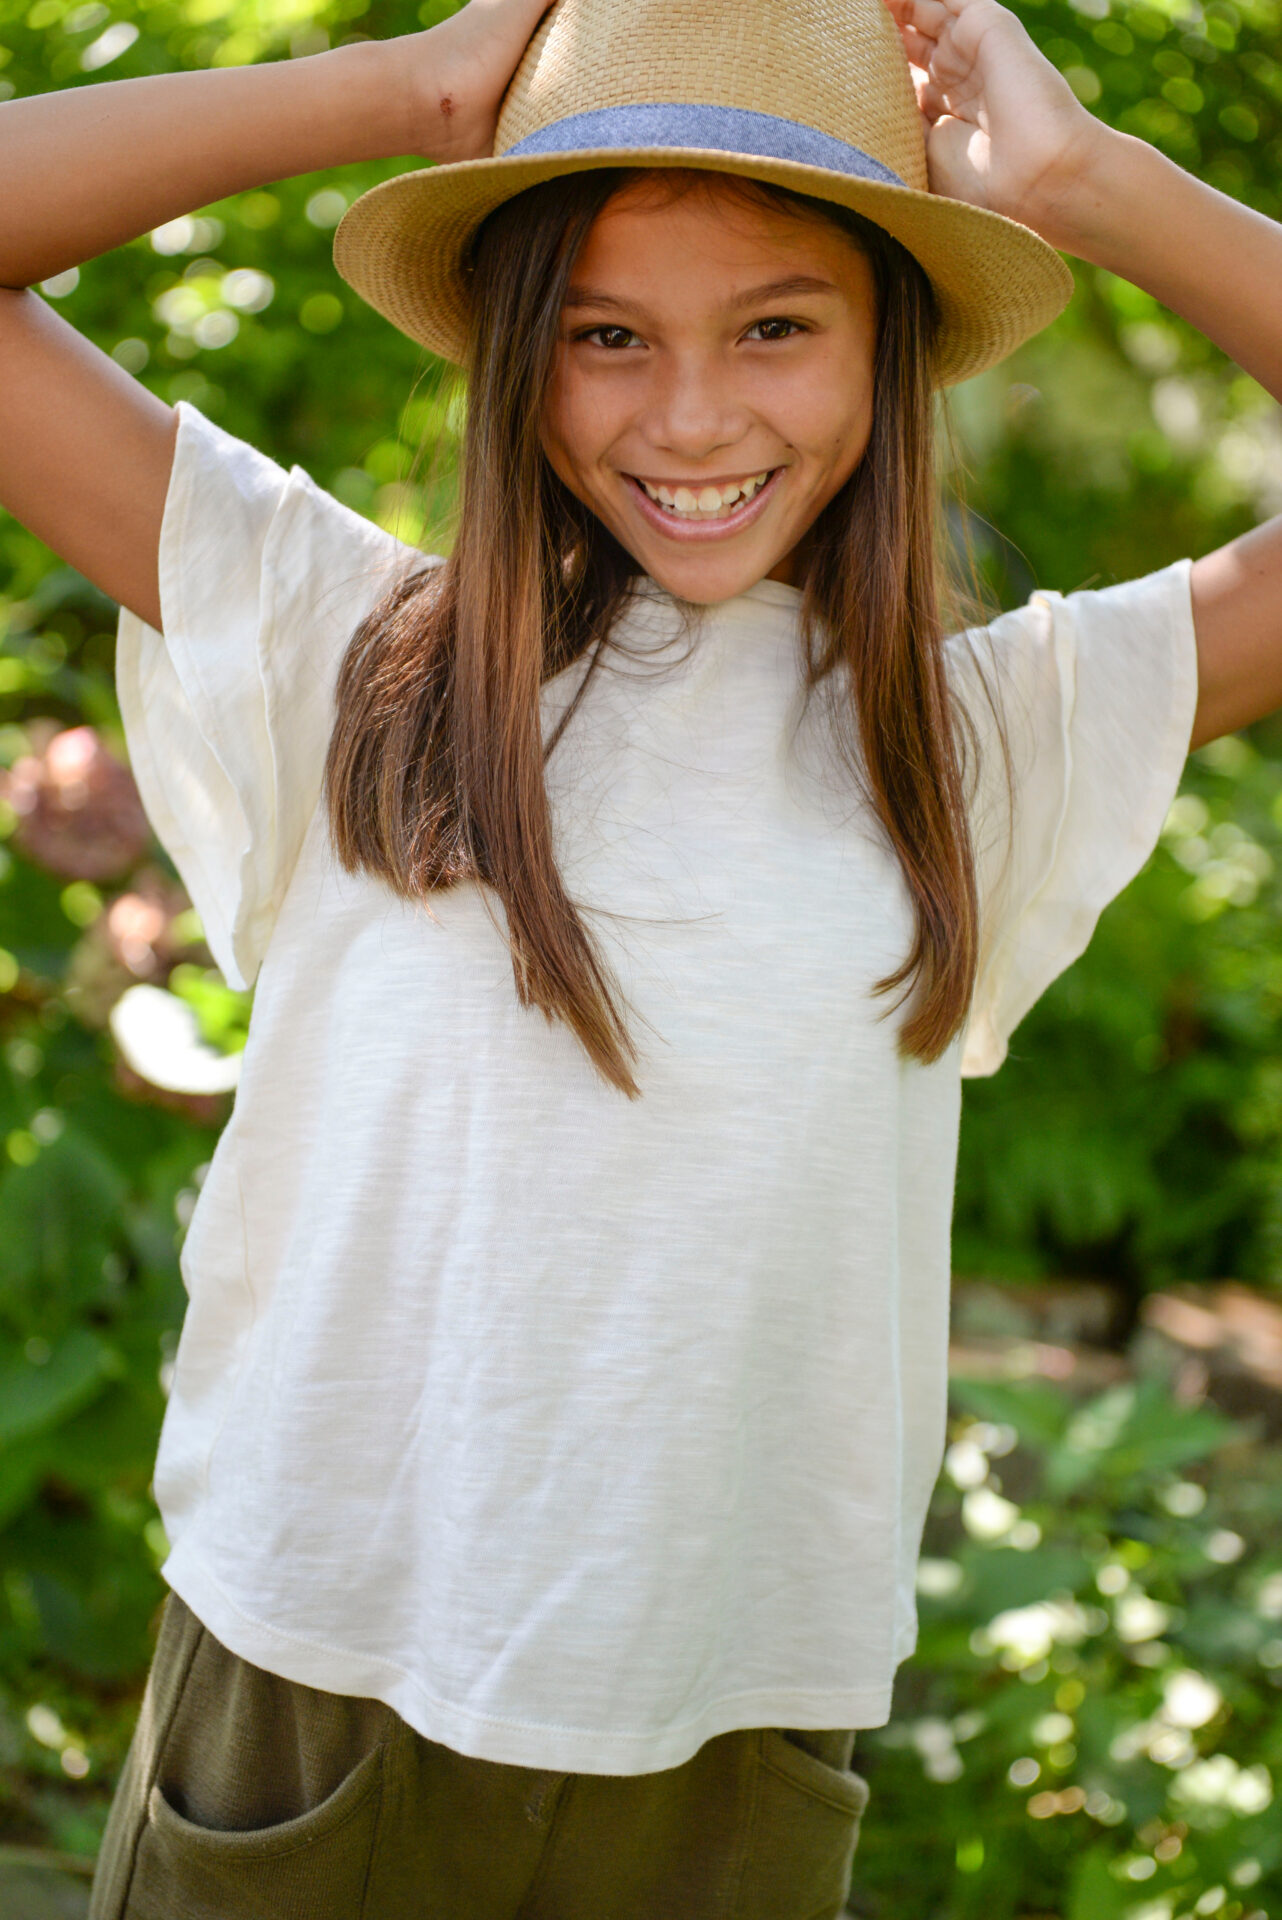 A teen smiling at the camera wearing a white top and a woven bucket hat